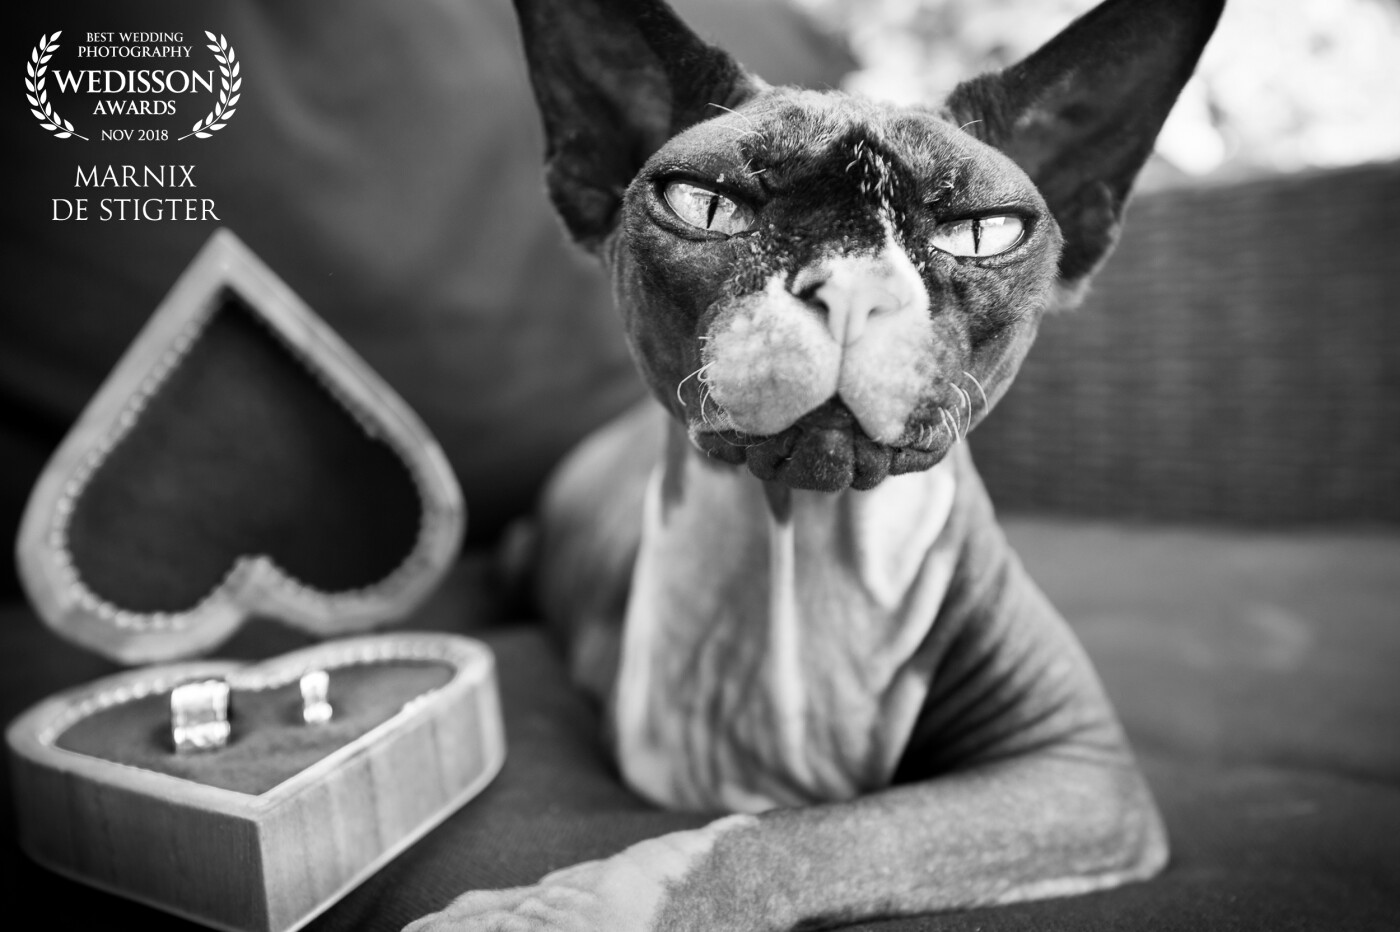 The moment I walked into the room to shoot the getting-ready of the bride, this 3-legged Sphynx cat was staring straight at me. I immediately got this "Lord of the Rings" feel, so the idea to shoot this image naturally came to mind.